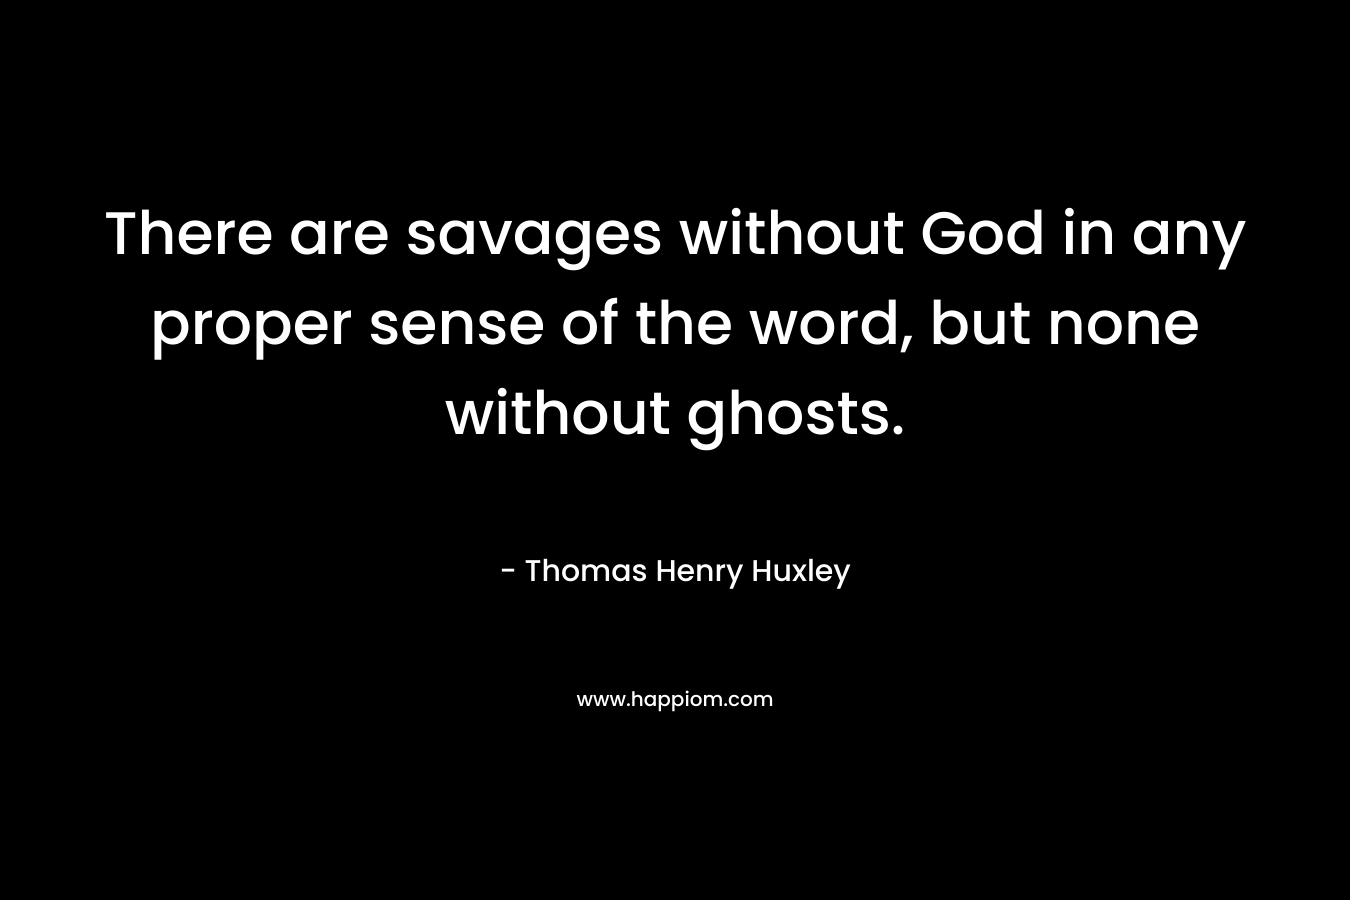 There are savages without God in any proper sense of the word, but none without ghosts.